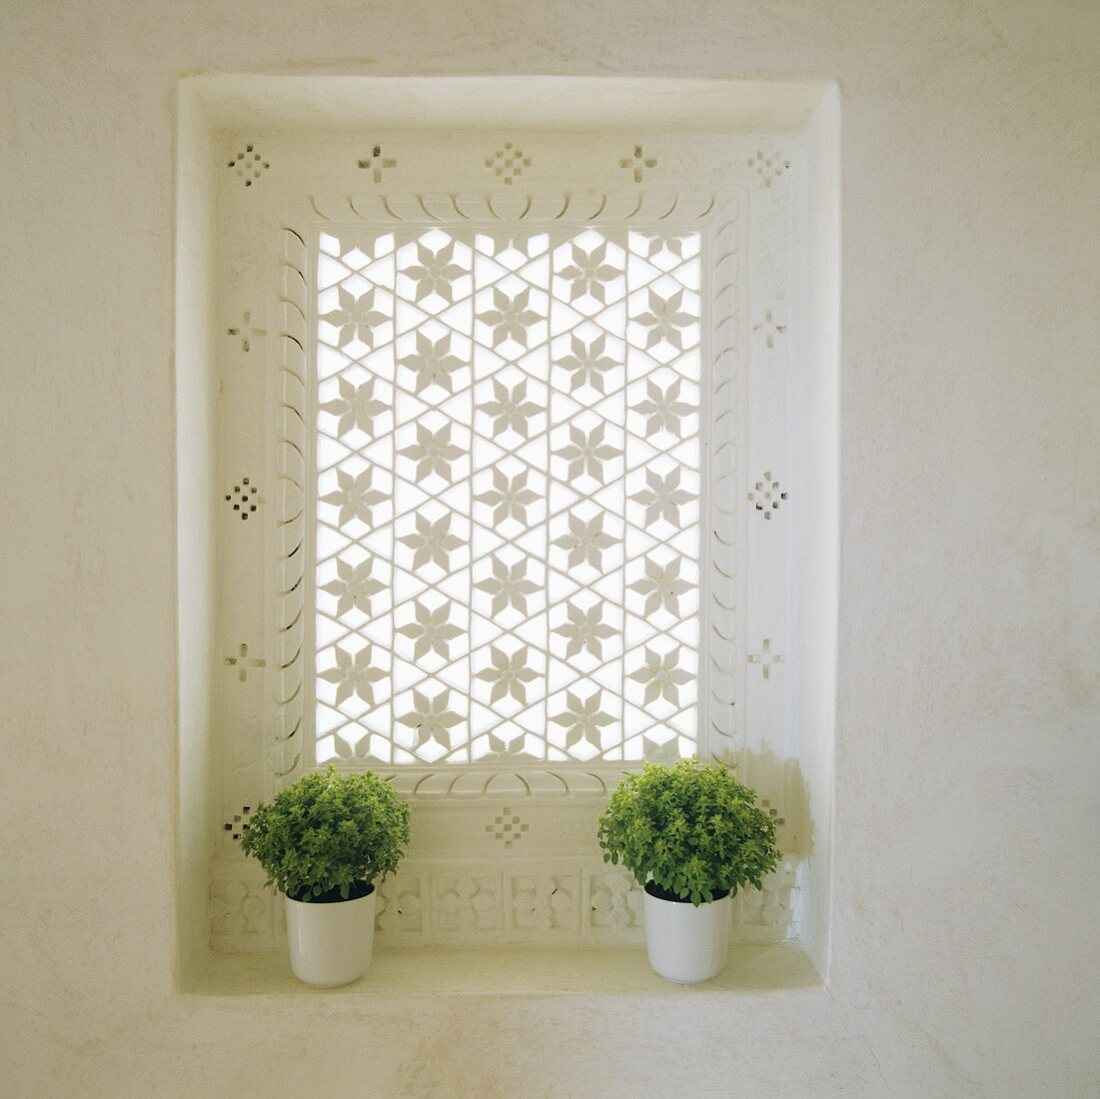 A window with a carved floral pattern and green plants in white pots